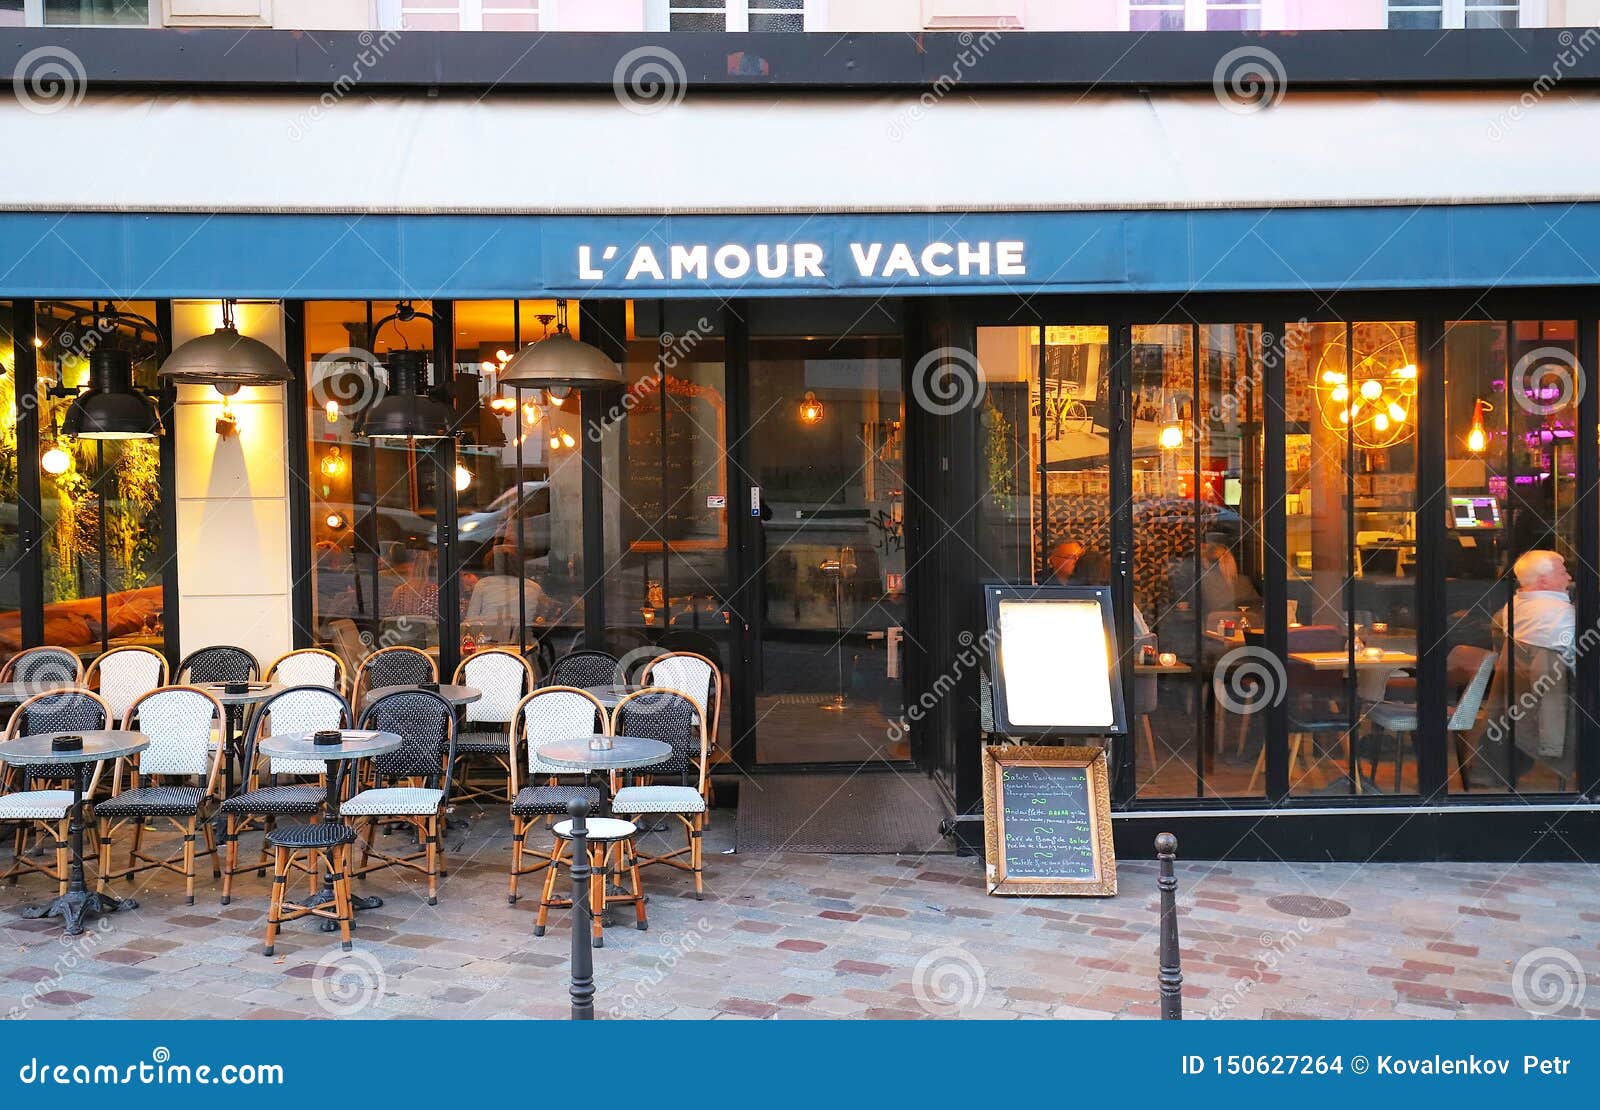 Amour Vache Is Traditional French Cafe Located At ...